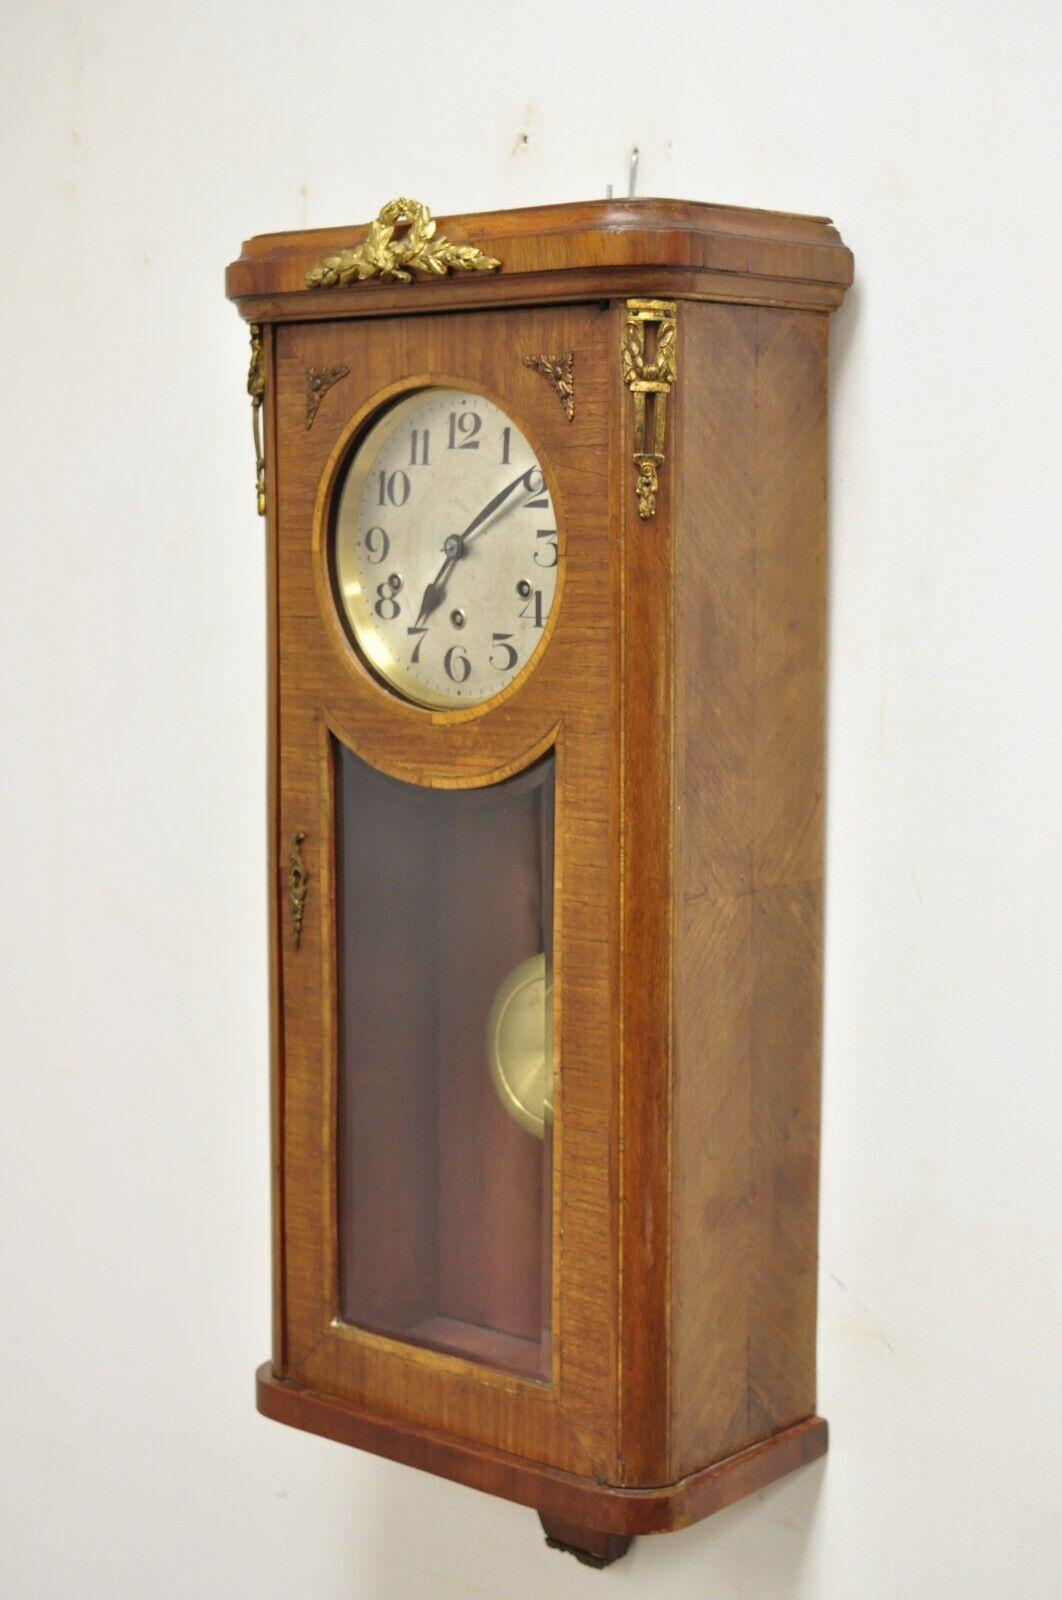 Antique German Inlaid French Style Box Wall Clock 8 Day with Westminster Chime. Item features Bronze ormolu, beveled glass door, includes keys as pictured and paperwork from the last servicing which appears to be in 1997. Please read all supporting